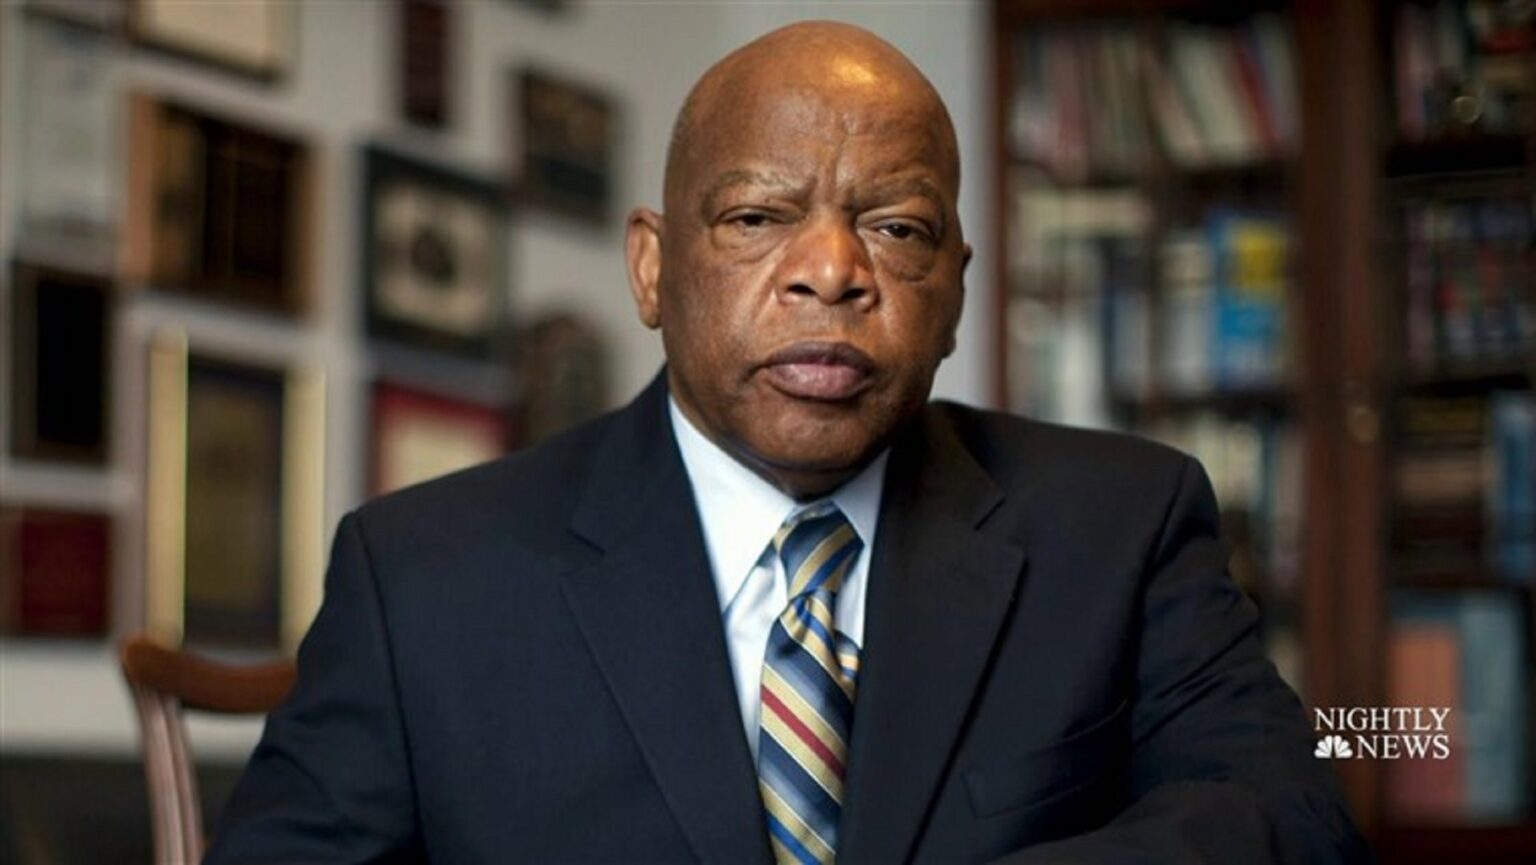 John Lewis is the original civil rights leader to emerge out of the 60s. Here’s everything you need to learn about Lewis’s astonishing career.